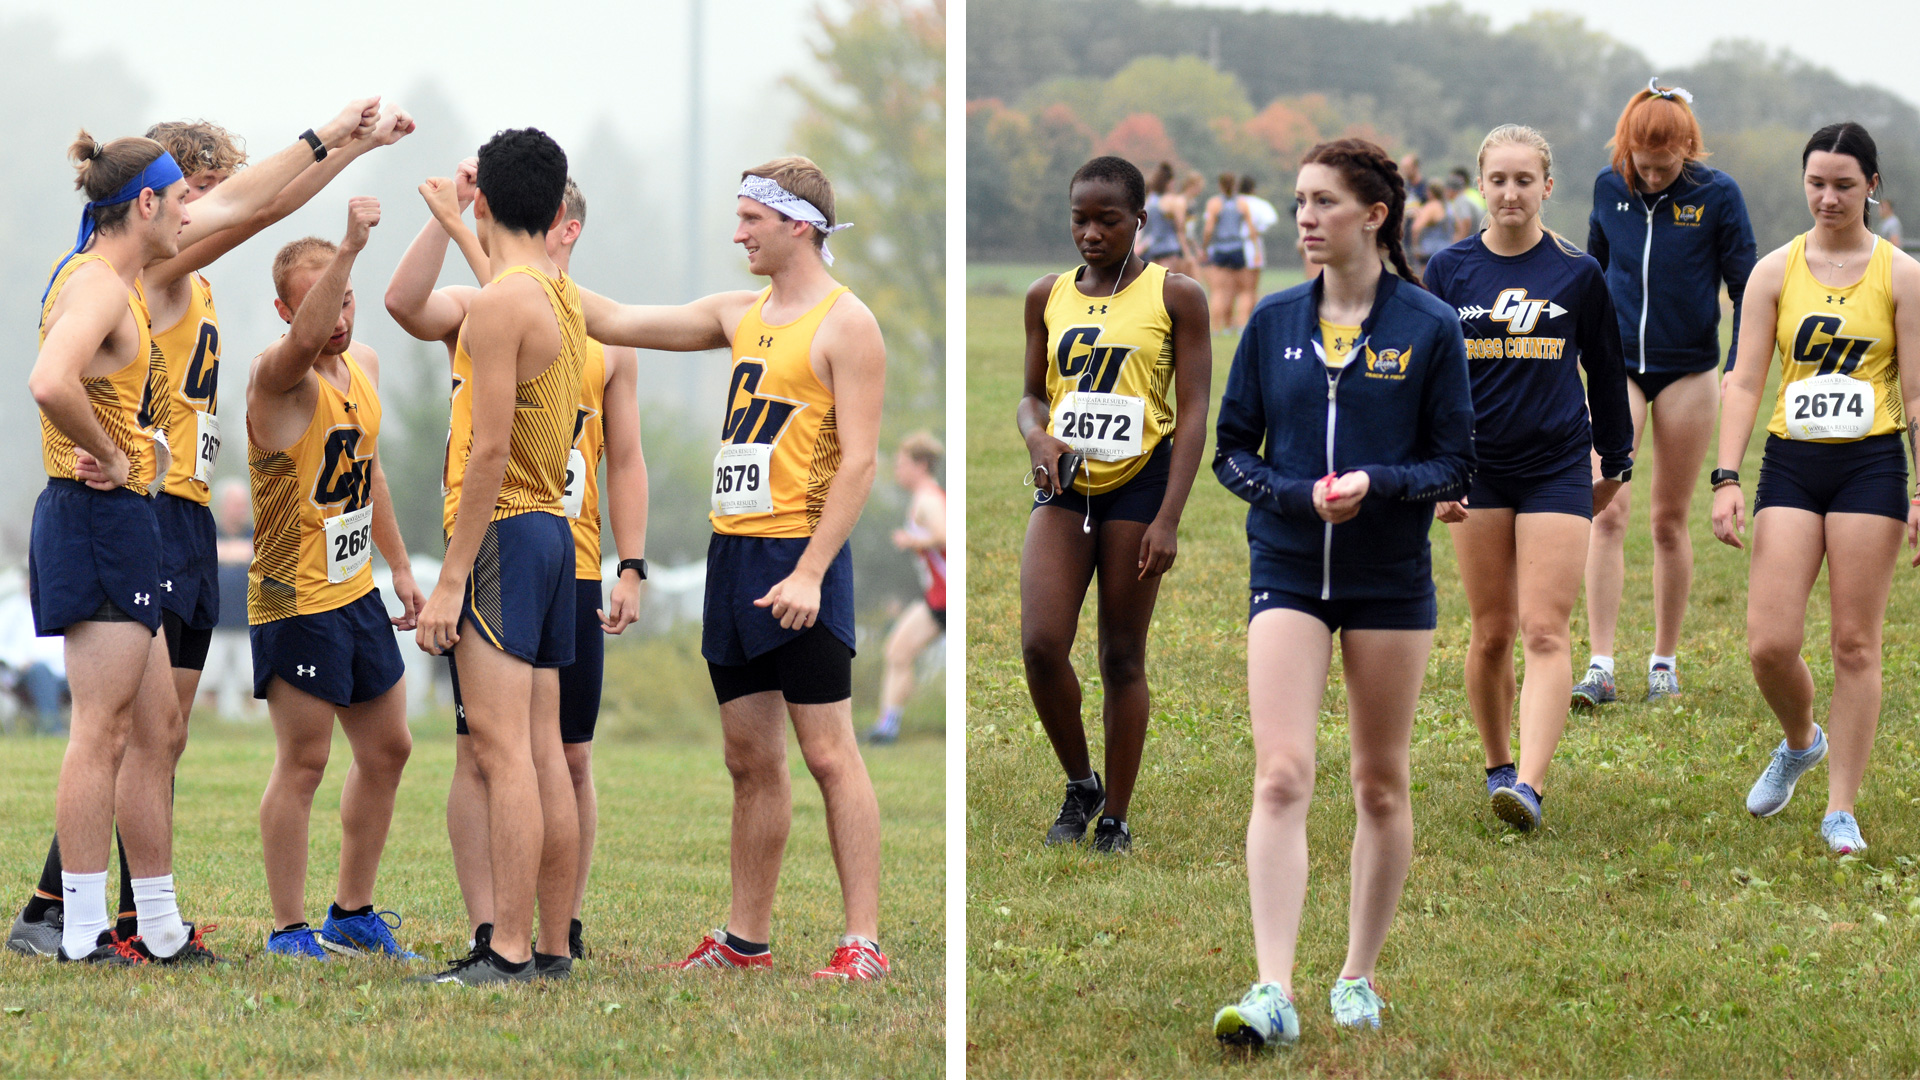 Clarke men's and women's cross country teams prior to the start of their races